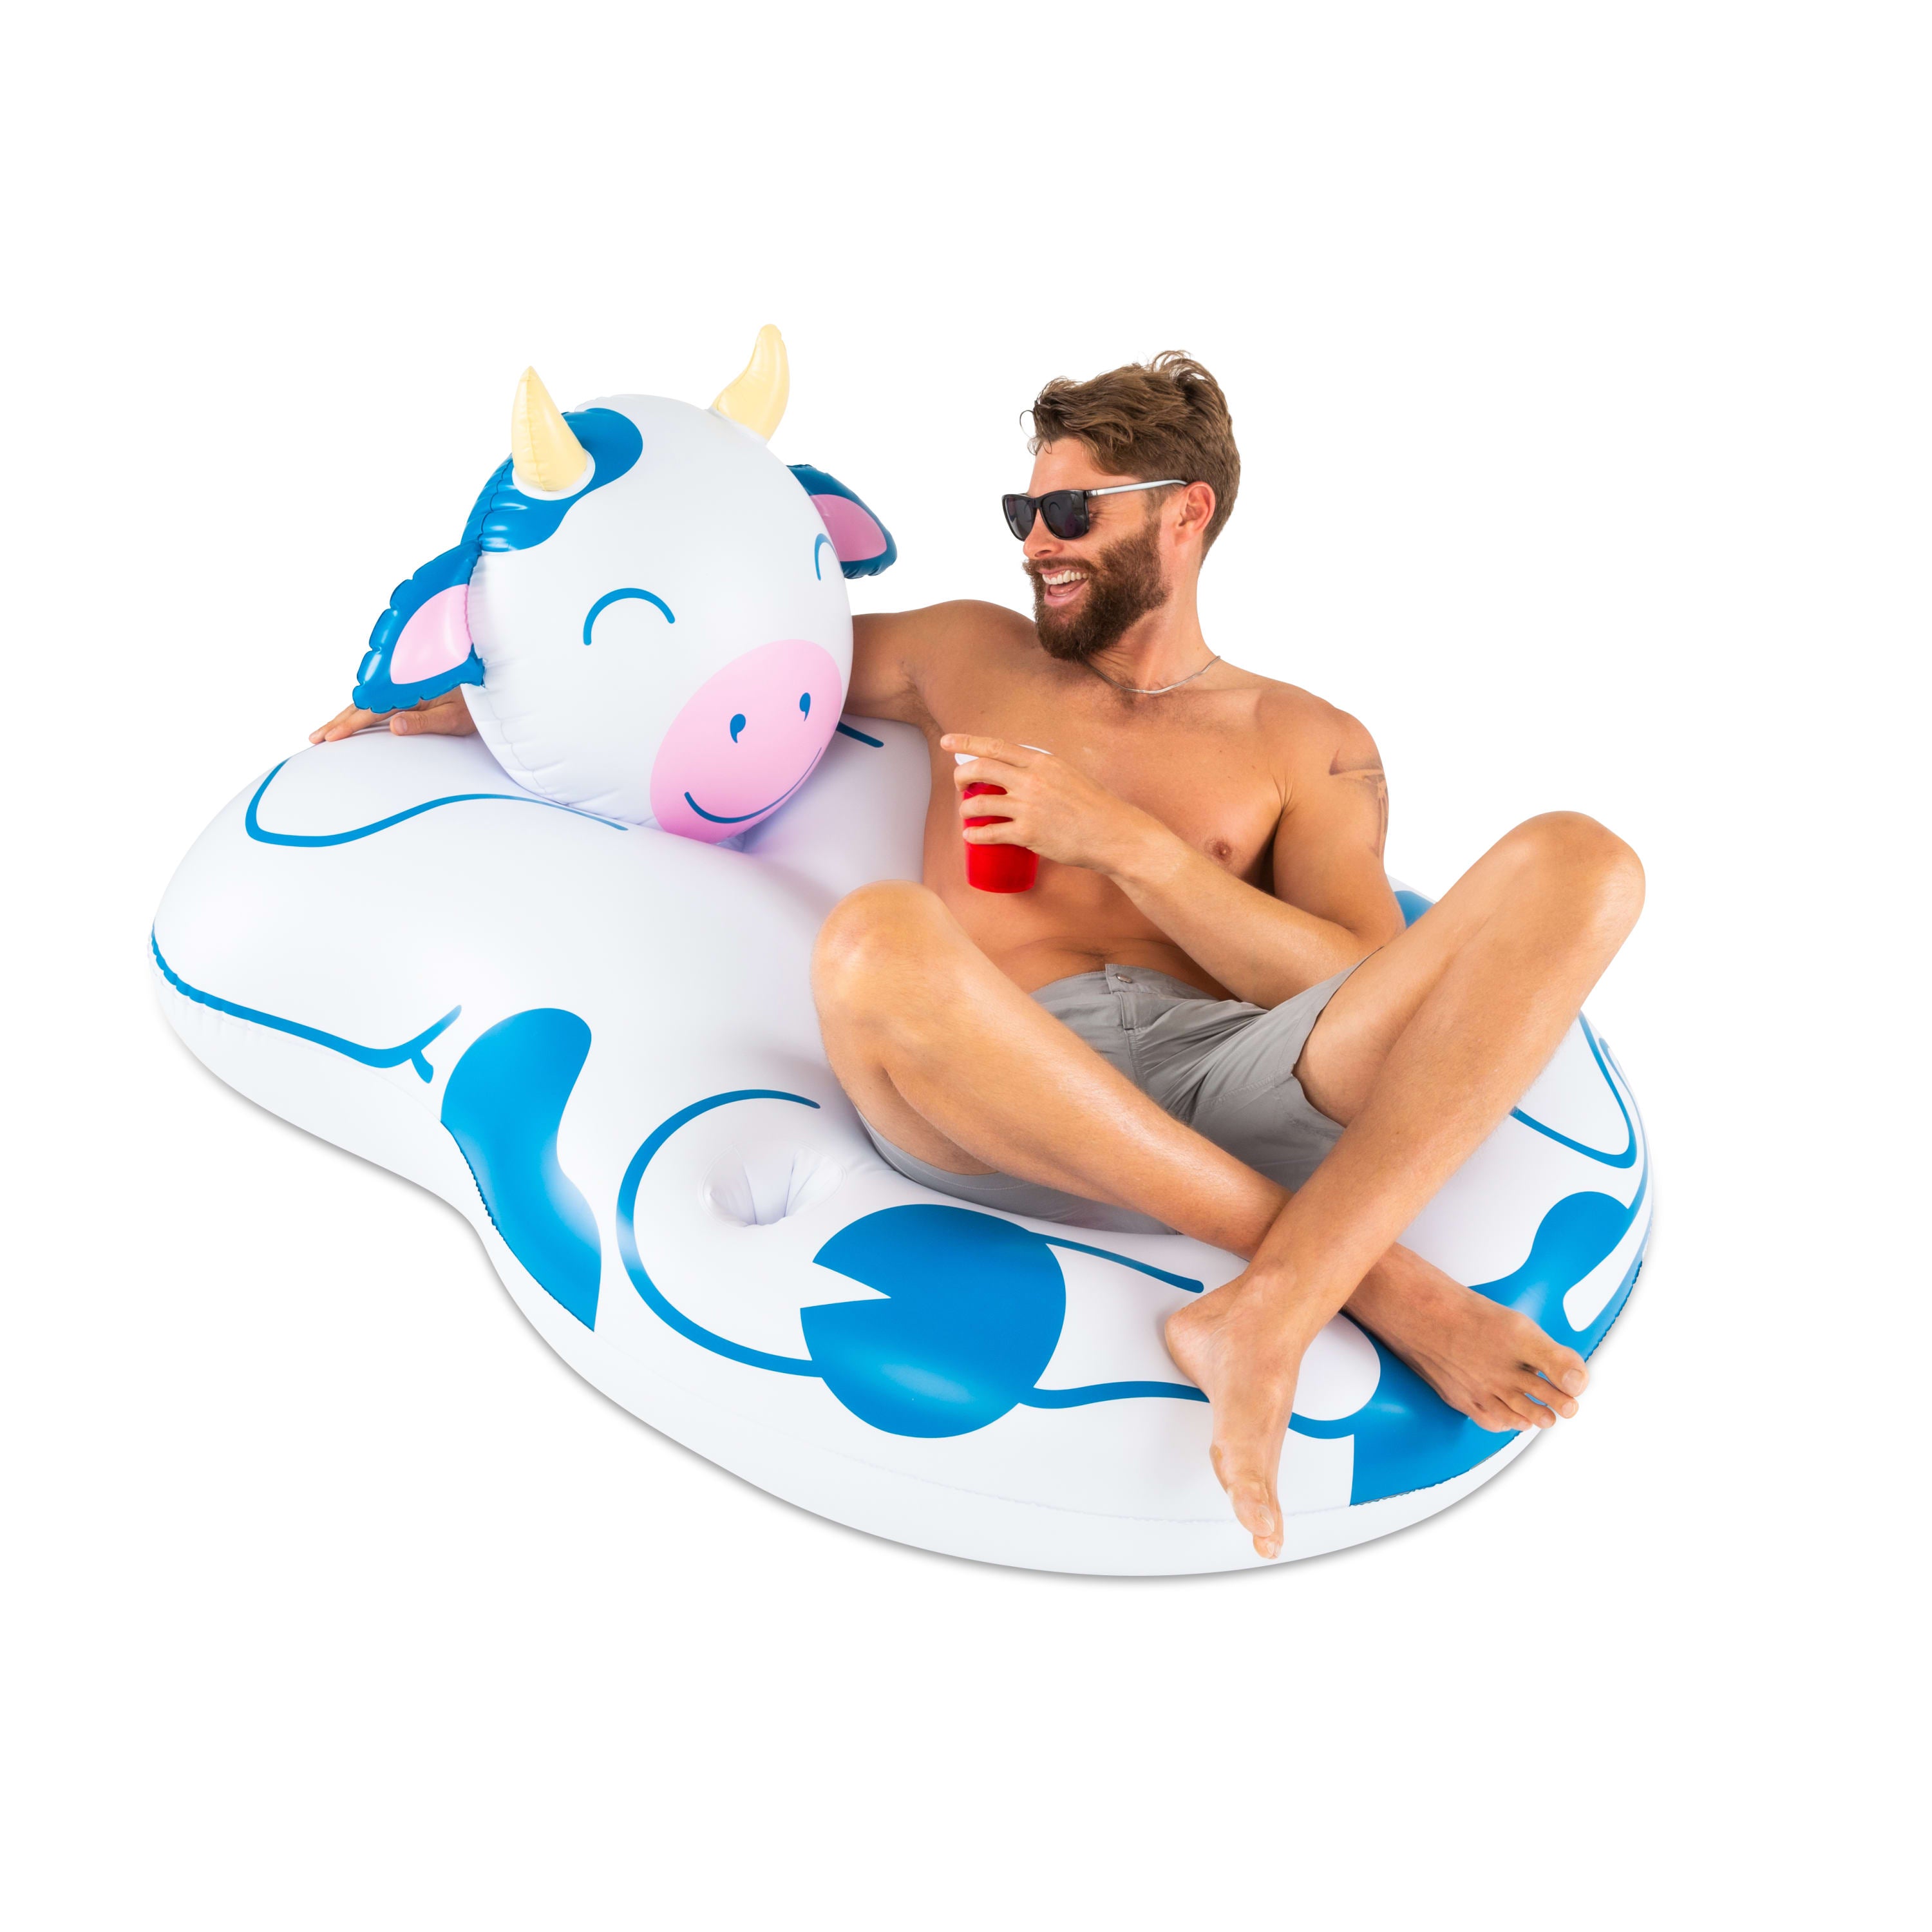 Daydreamin' Animal Pool Float (cow)